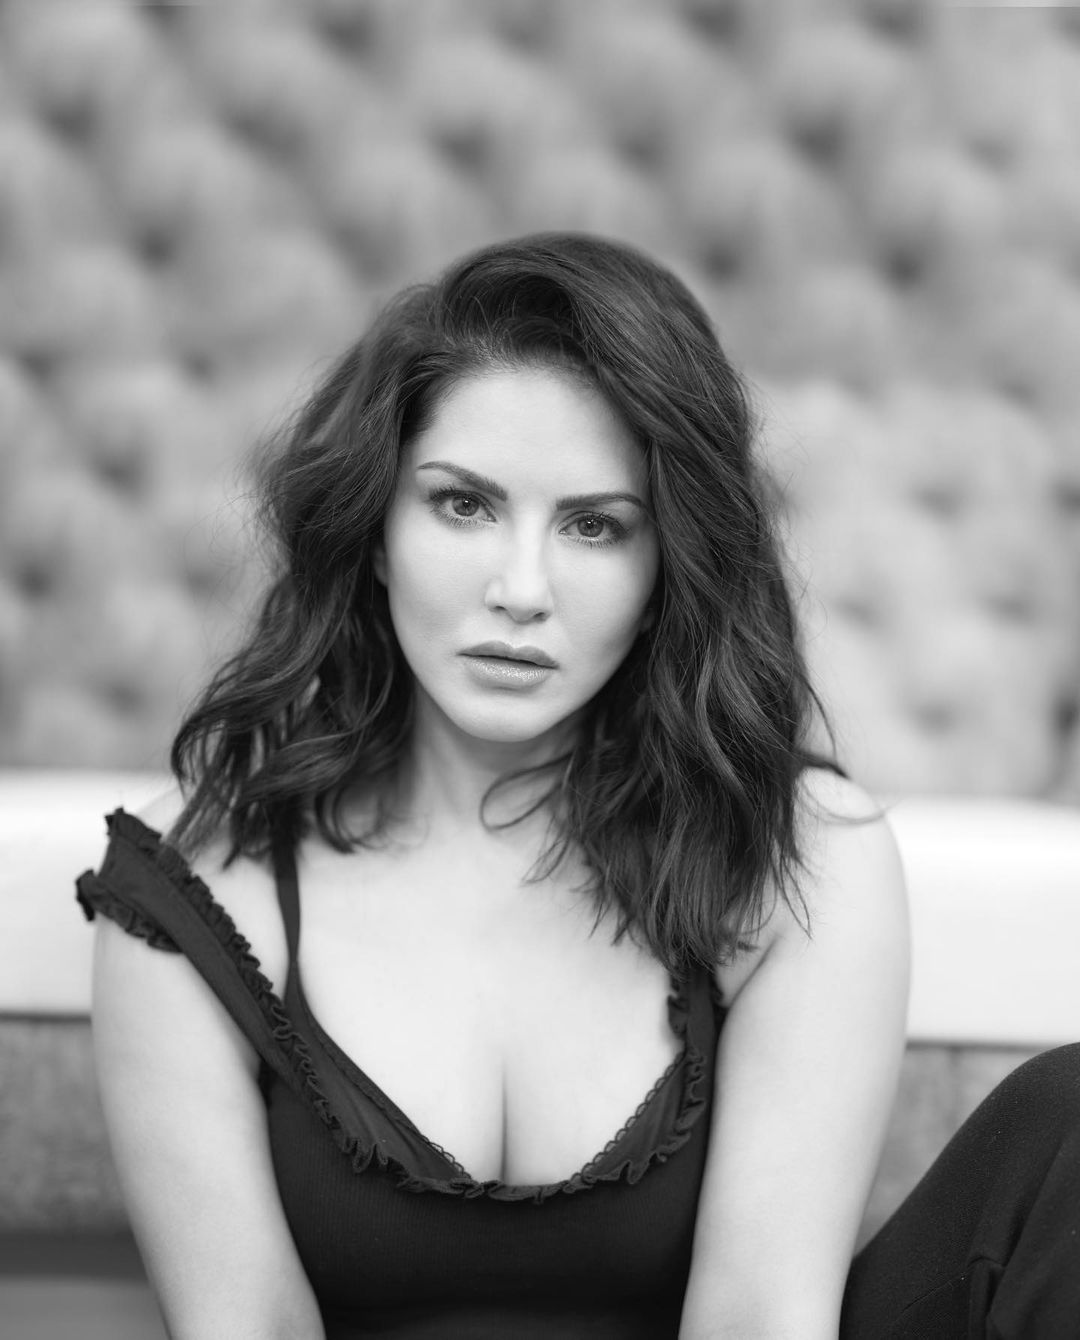 Sunny Leone gives a peek into her bralette through her top